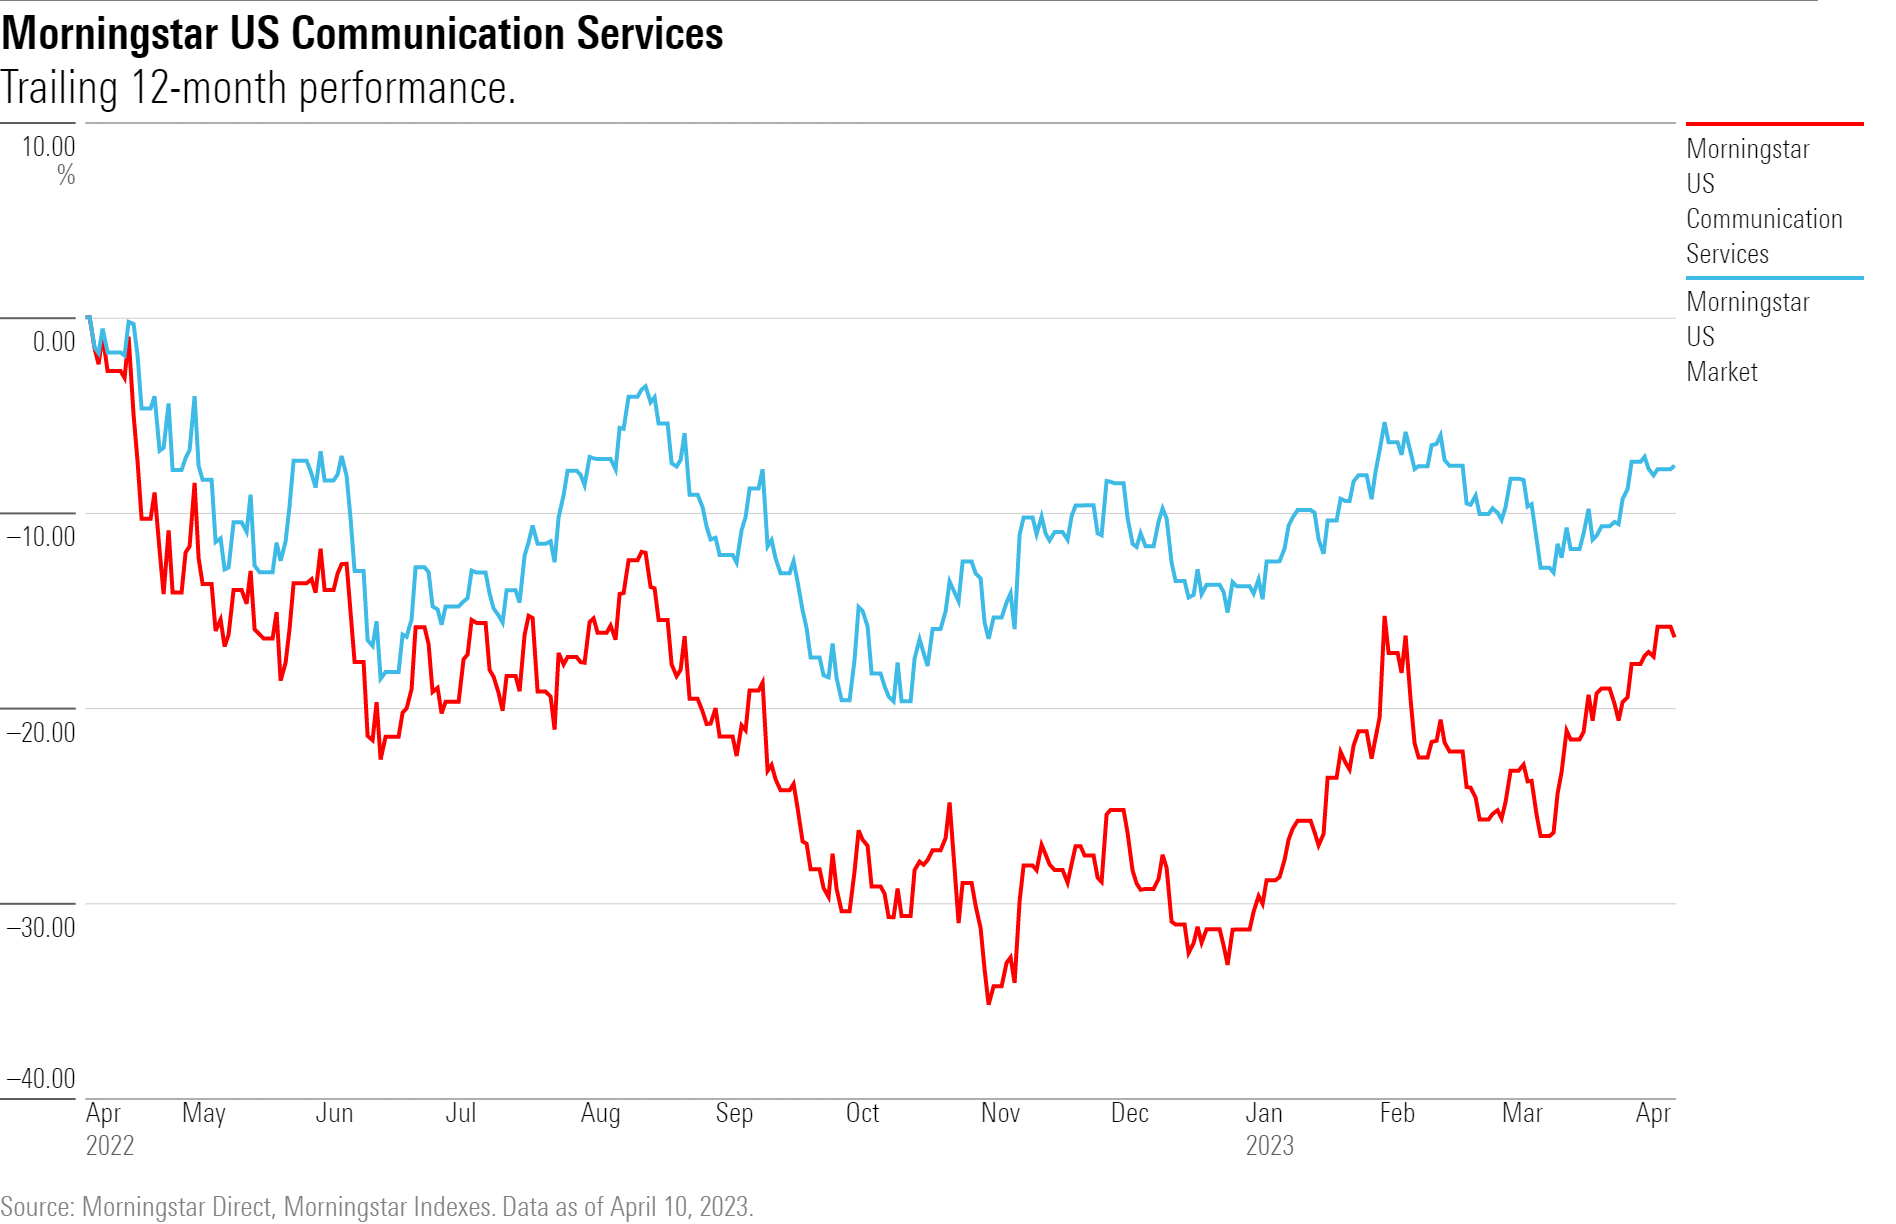 Line chart of trailing 12-month performance of the Morningstar US Communication Services index compared to the Morningstar US Market Index from April 2022-April 2023